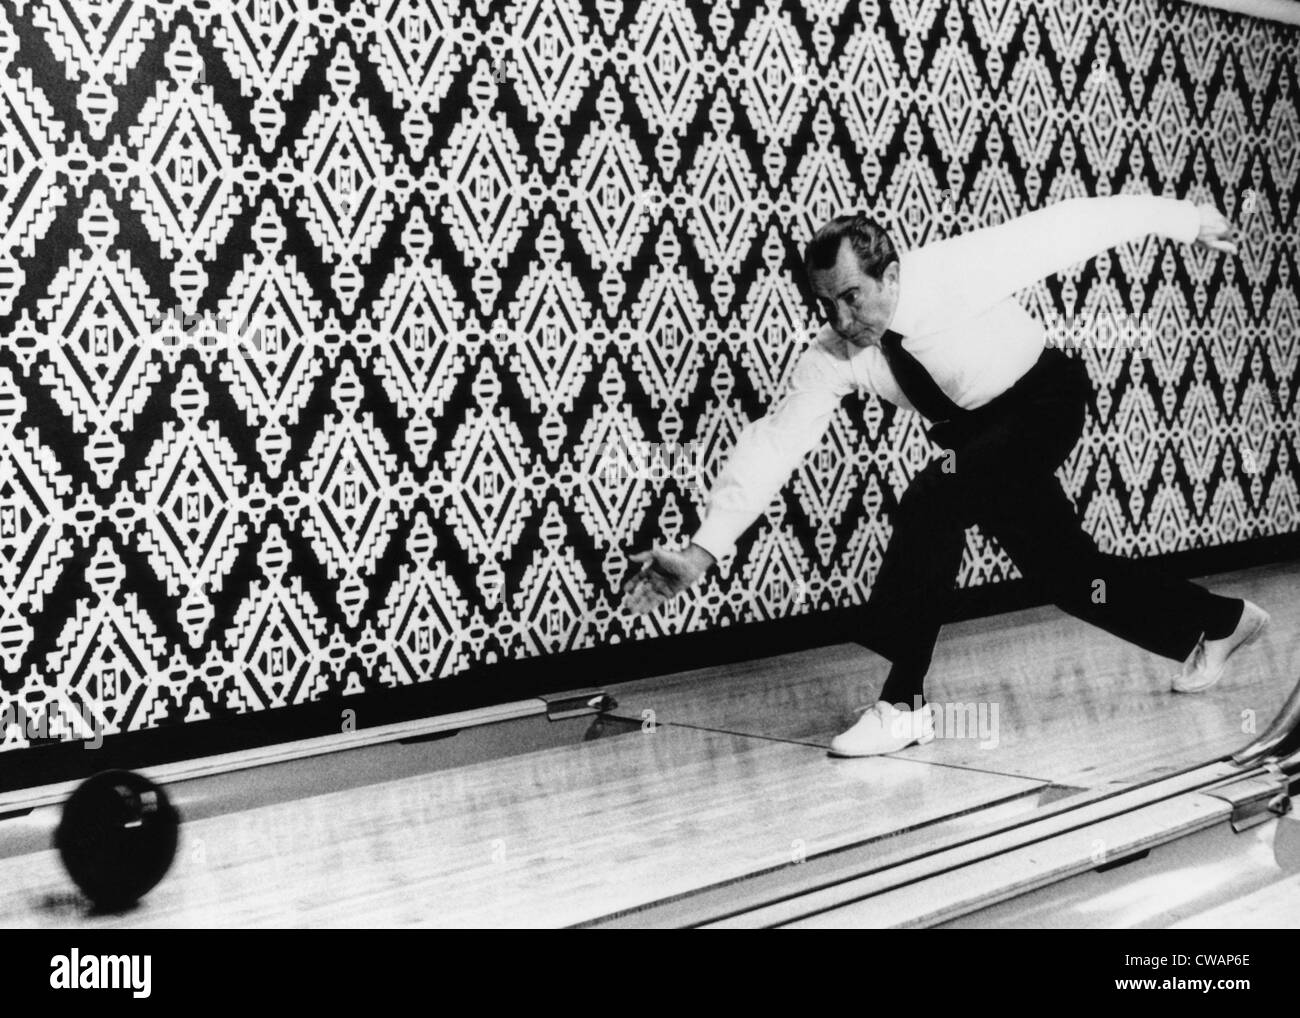 U.S. President Richard Nixon, bowling in the Executive Office Building located across from the White House, Washington D.C., Stock Photo